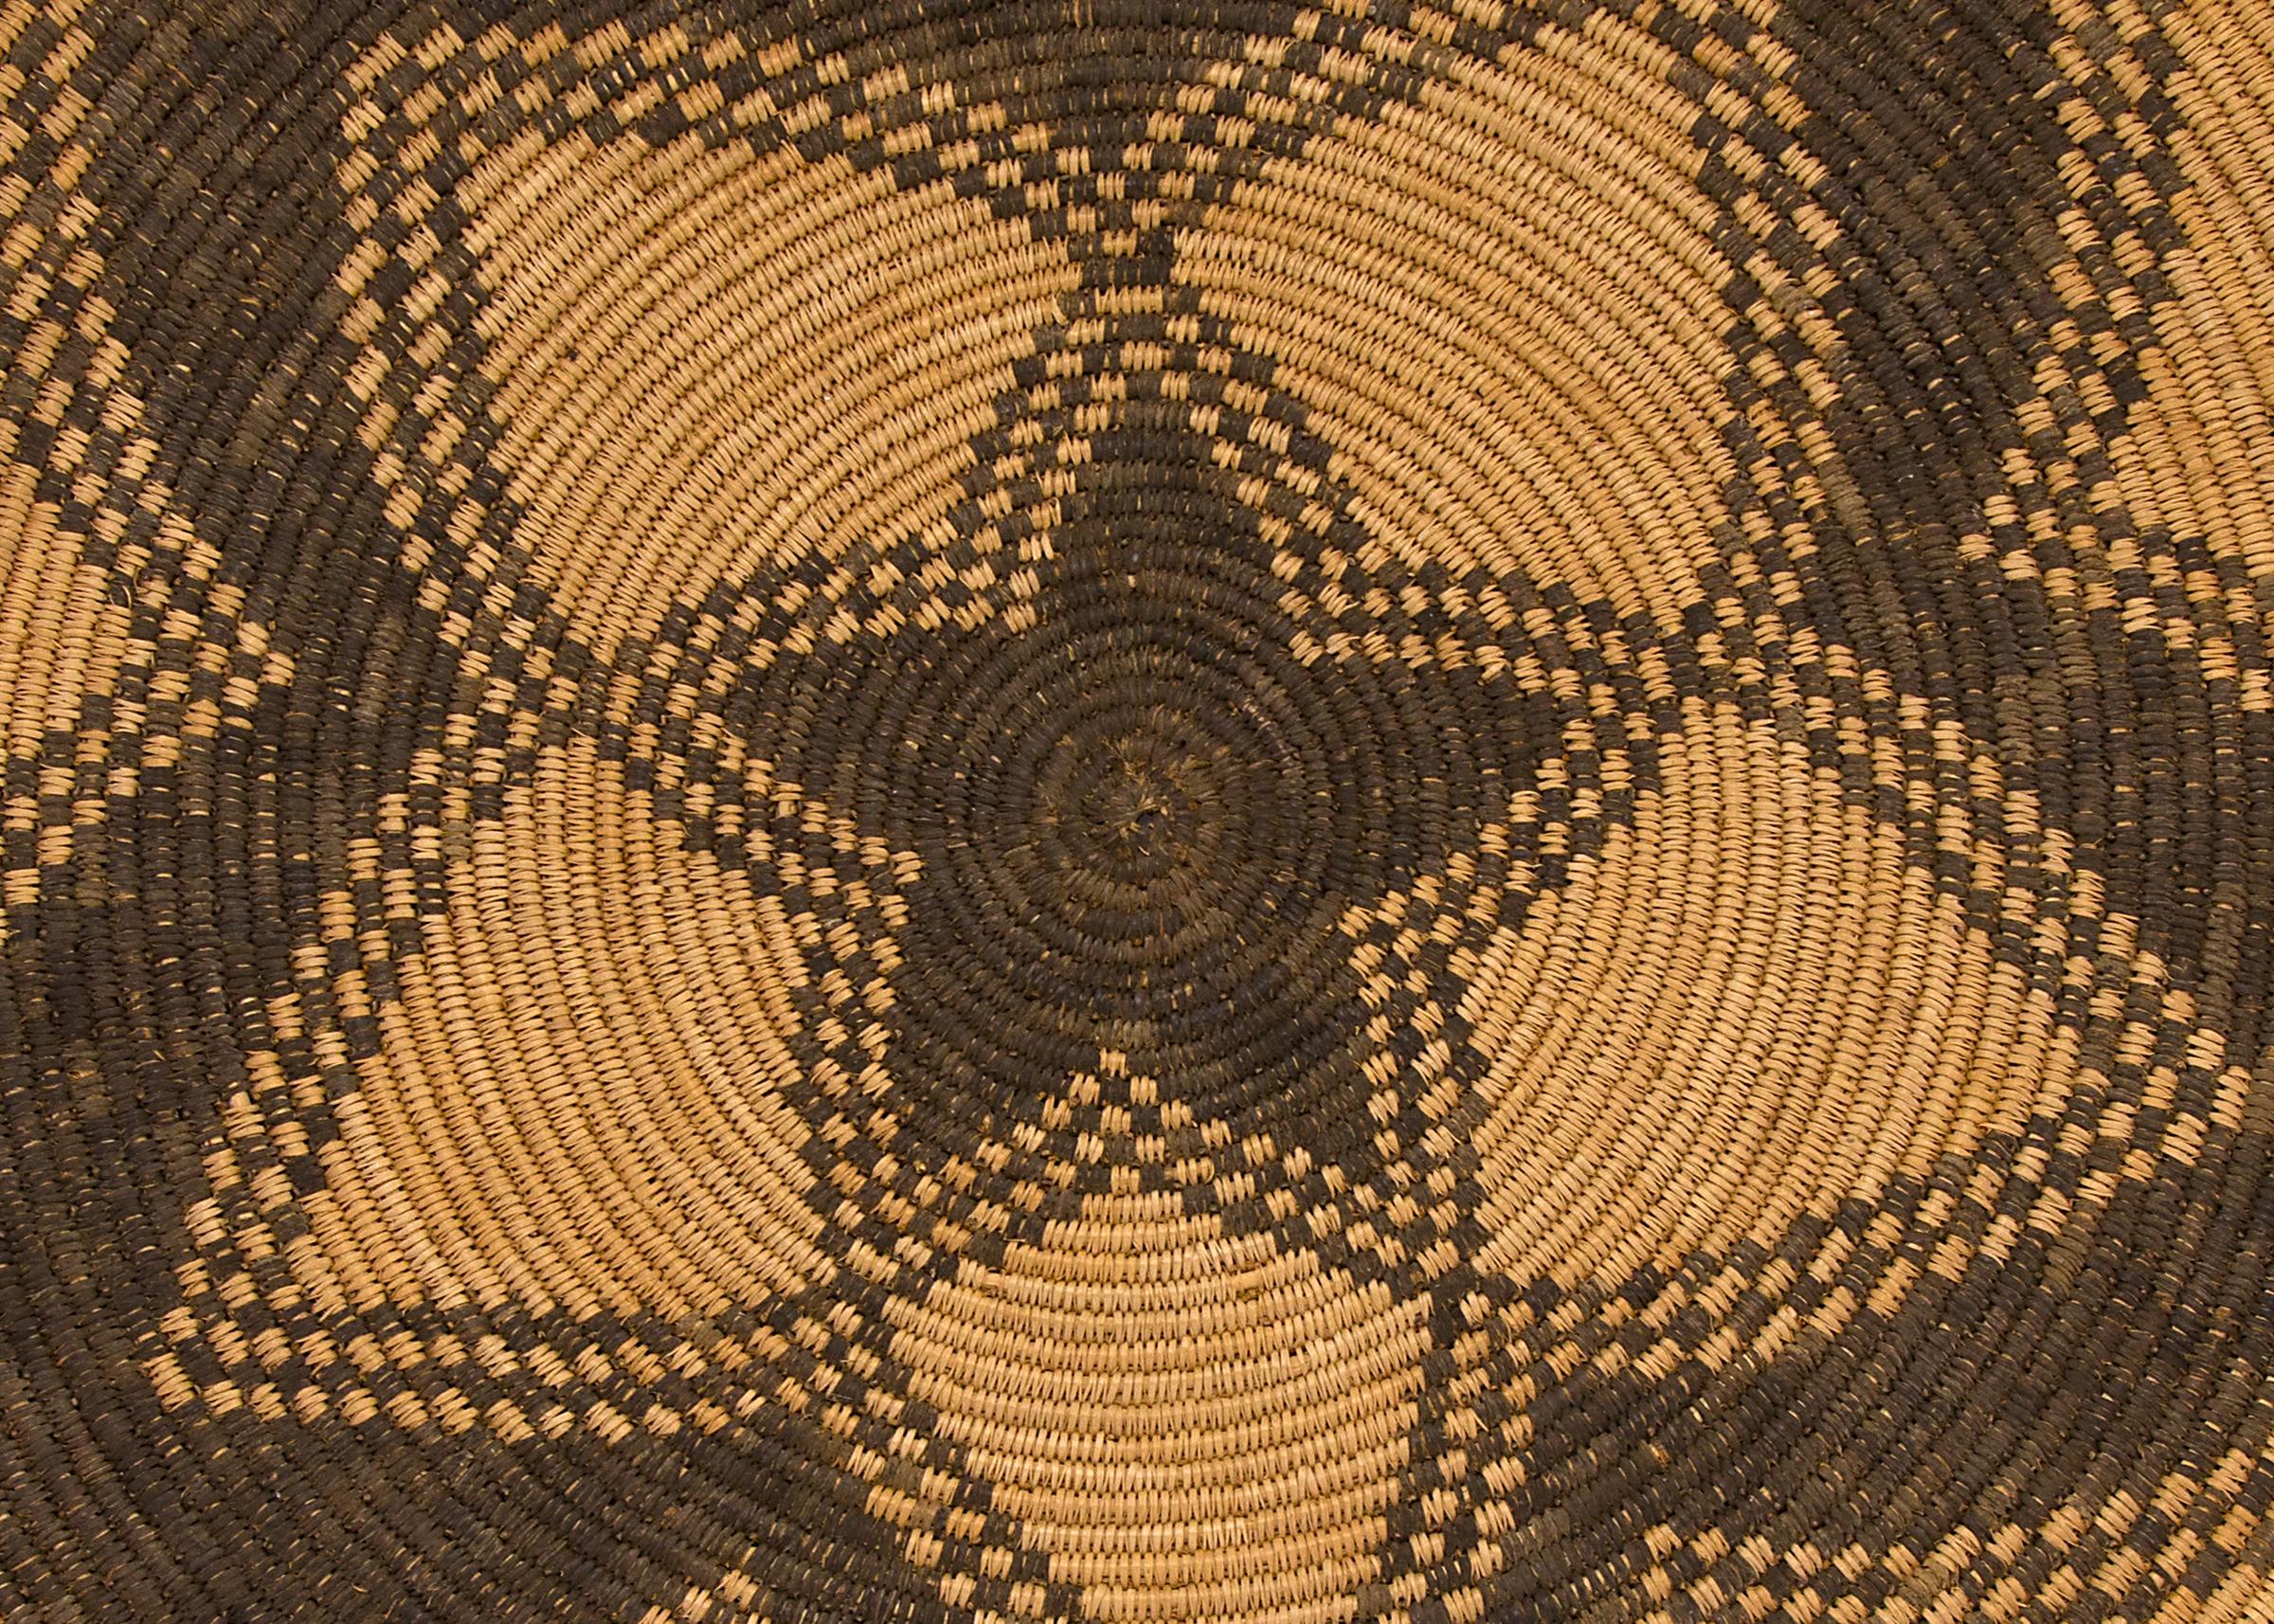 Antique Apache (North American Indian) woven basketry tray, circa 1900 (late 19th-early 20th century). Woven of willow and devil's claw in traditional designs, measuring 20.5 inches in diameter. This piece would make an excellent wall hanging. The